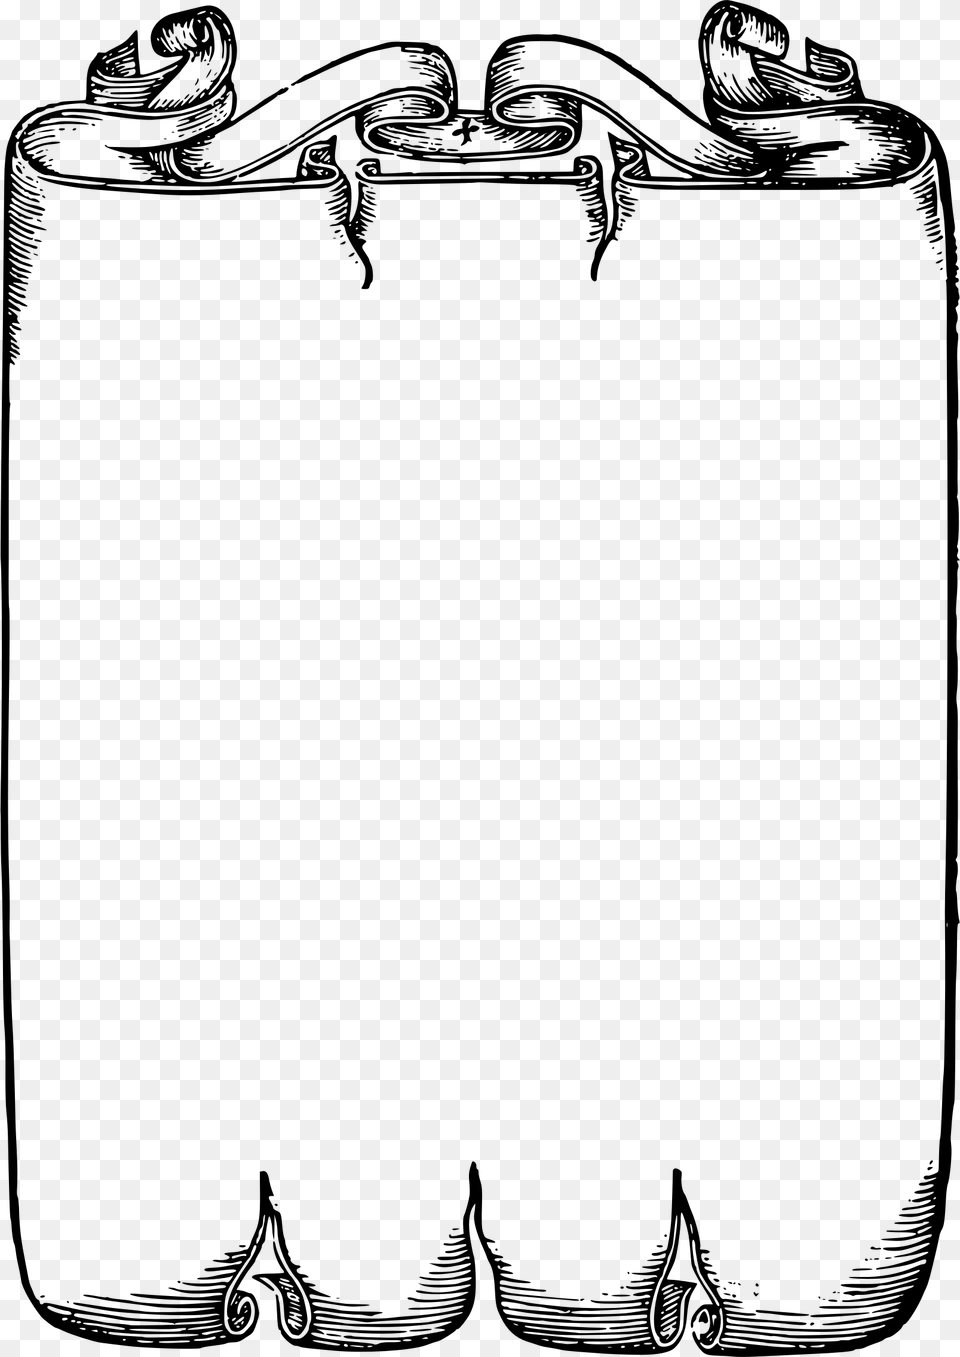 Scroll Border Border Designs In Black And White, Gray Free Png Download